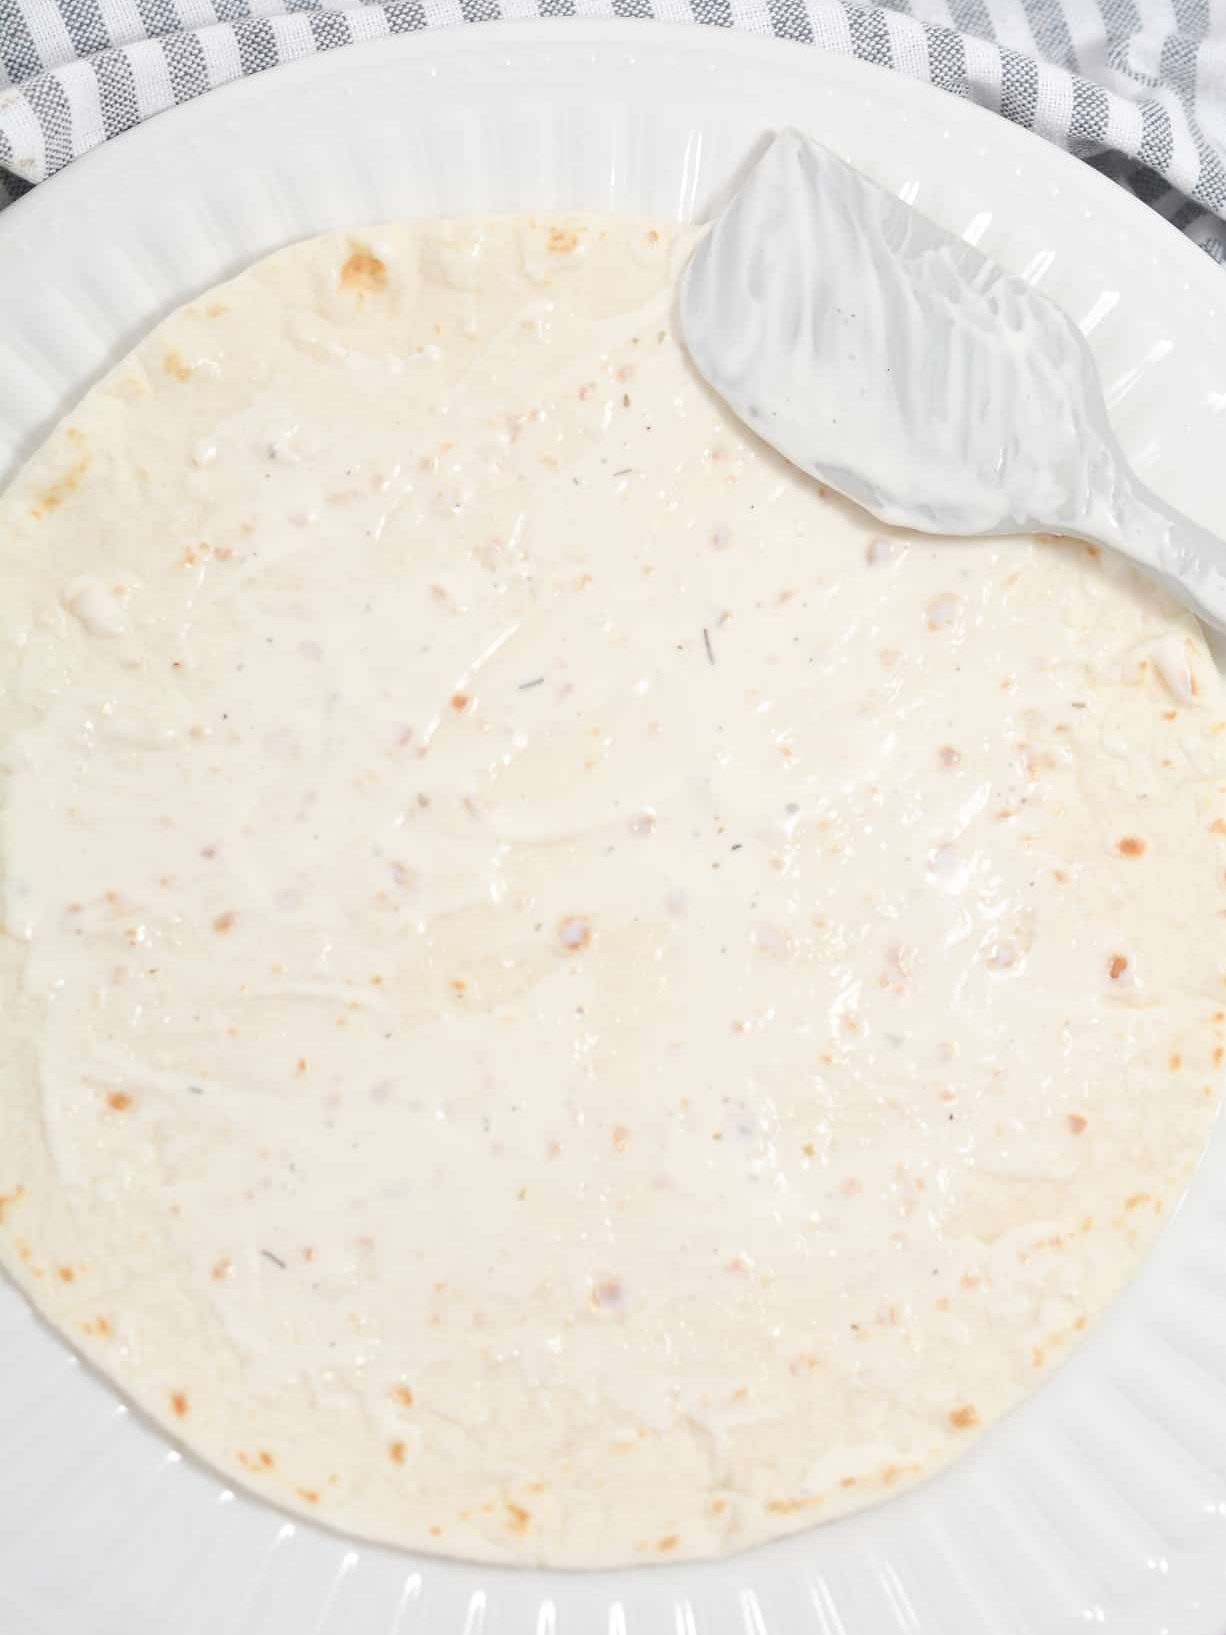 Spread some ranch dressing on one side of two different tortillas, and lay them on a counter dressing side up.